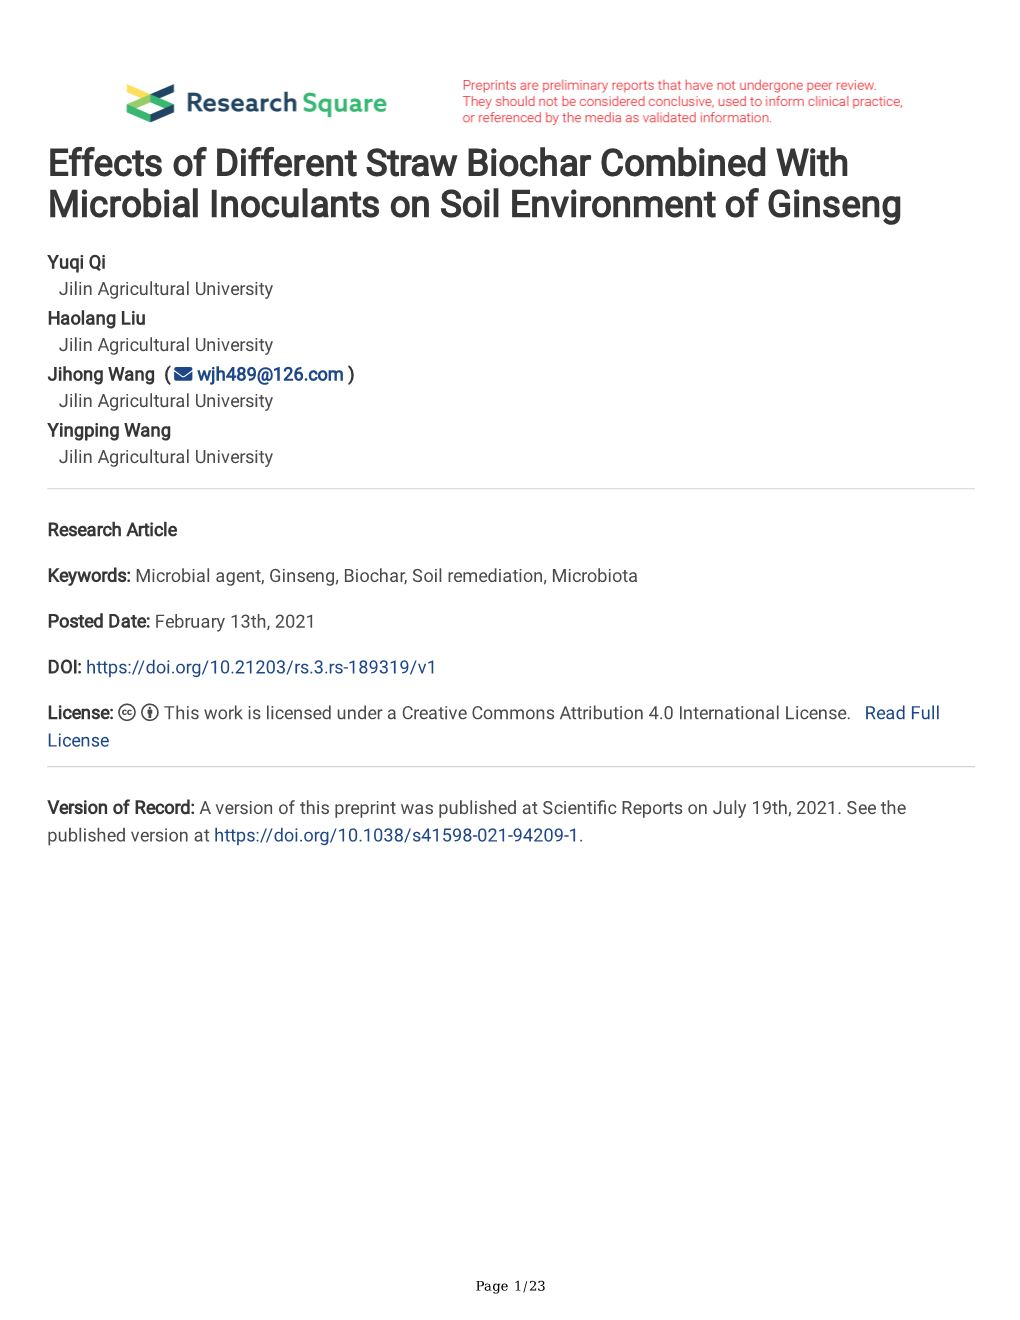 Effects of Different Straw Biochar Combined with Microbial Inoculants on Soil Environment of Ginseng